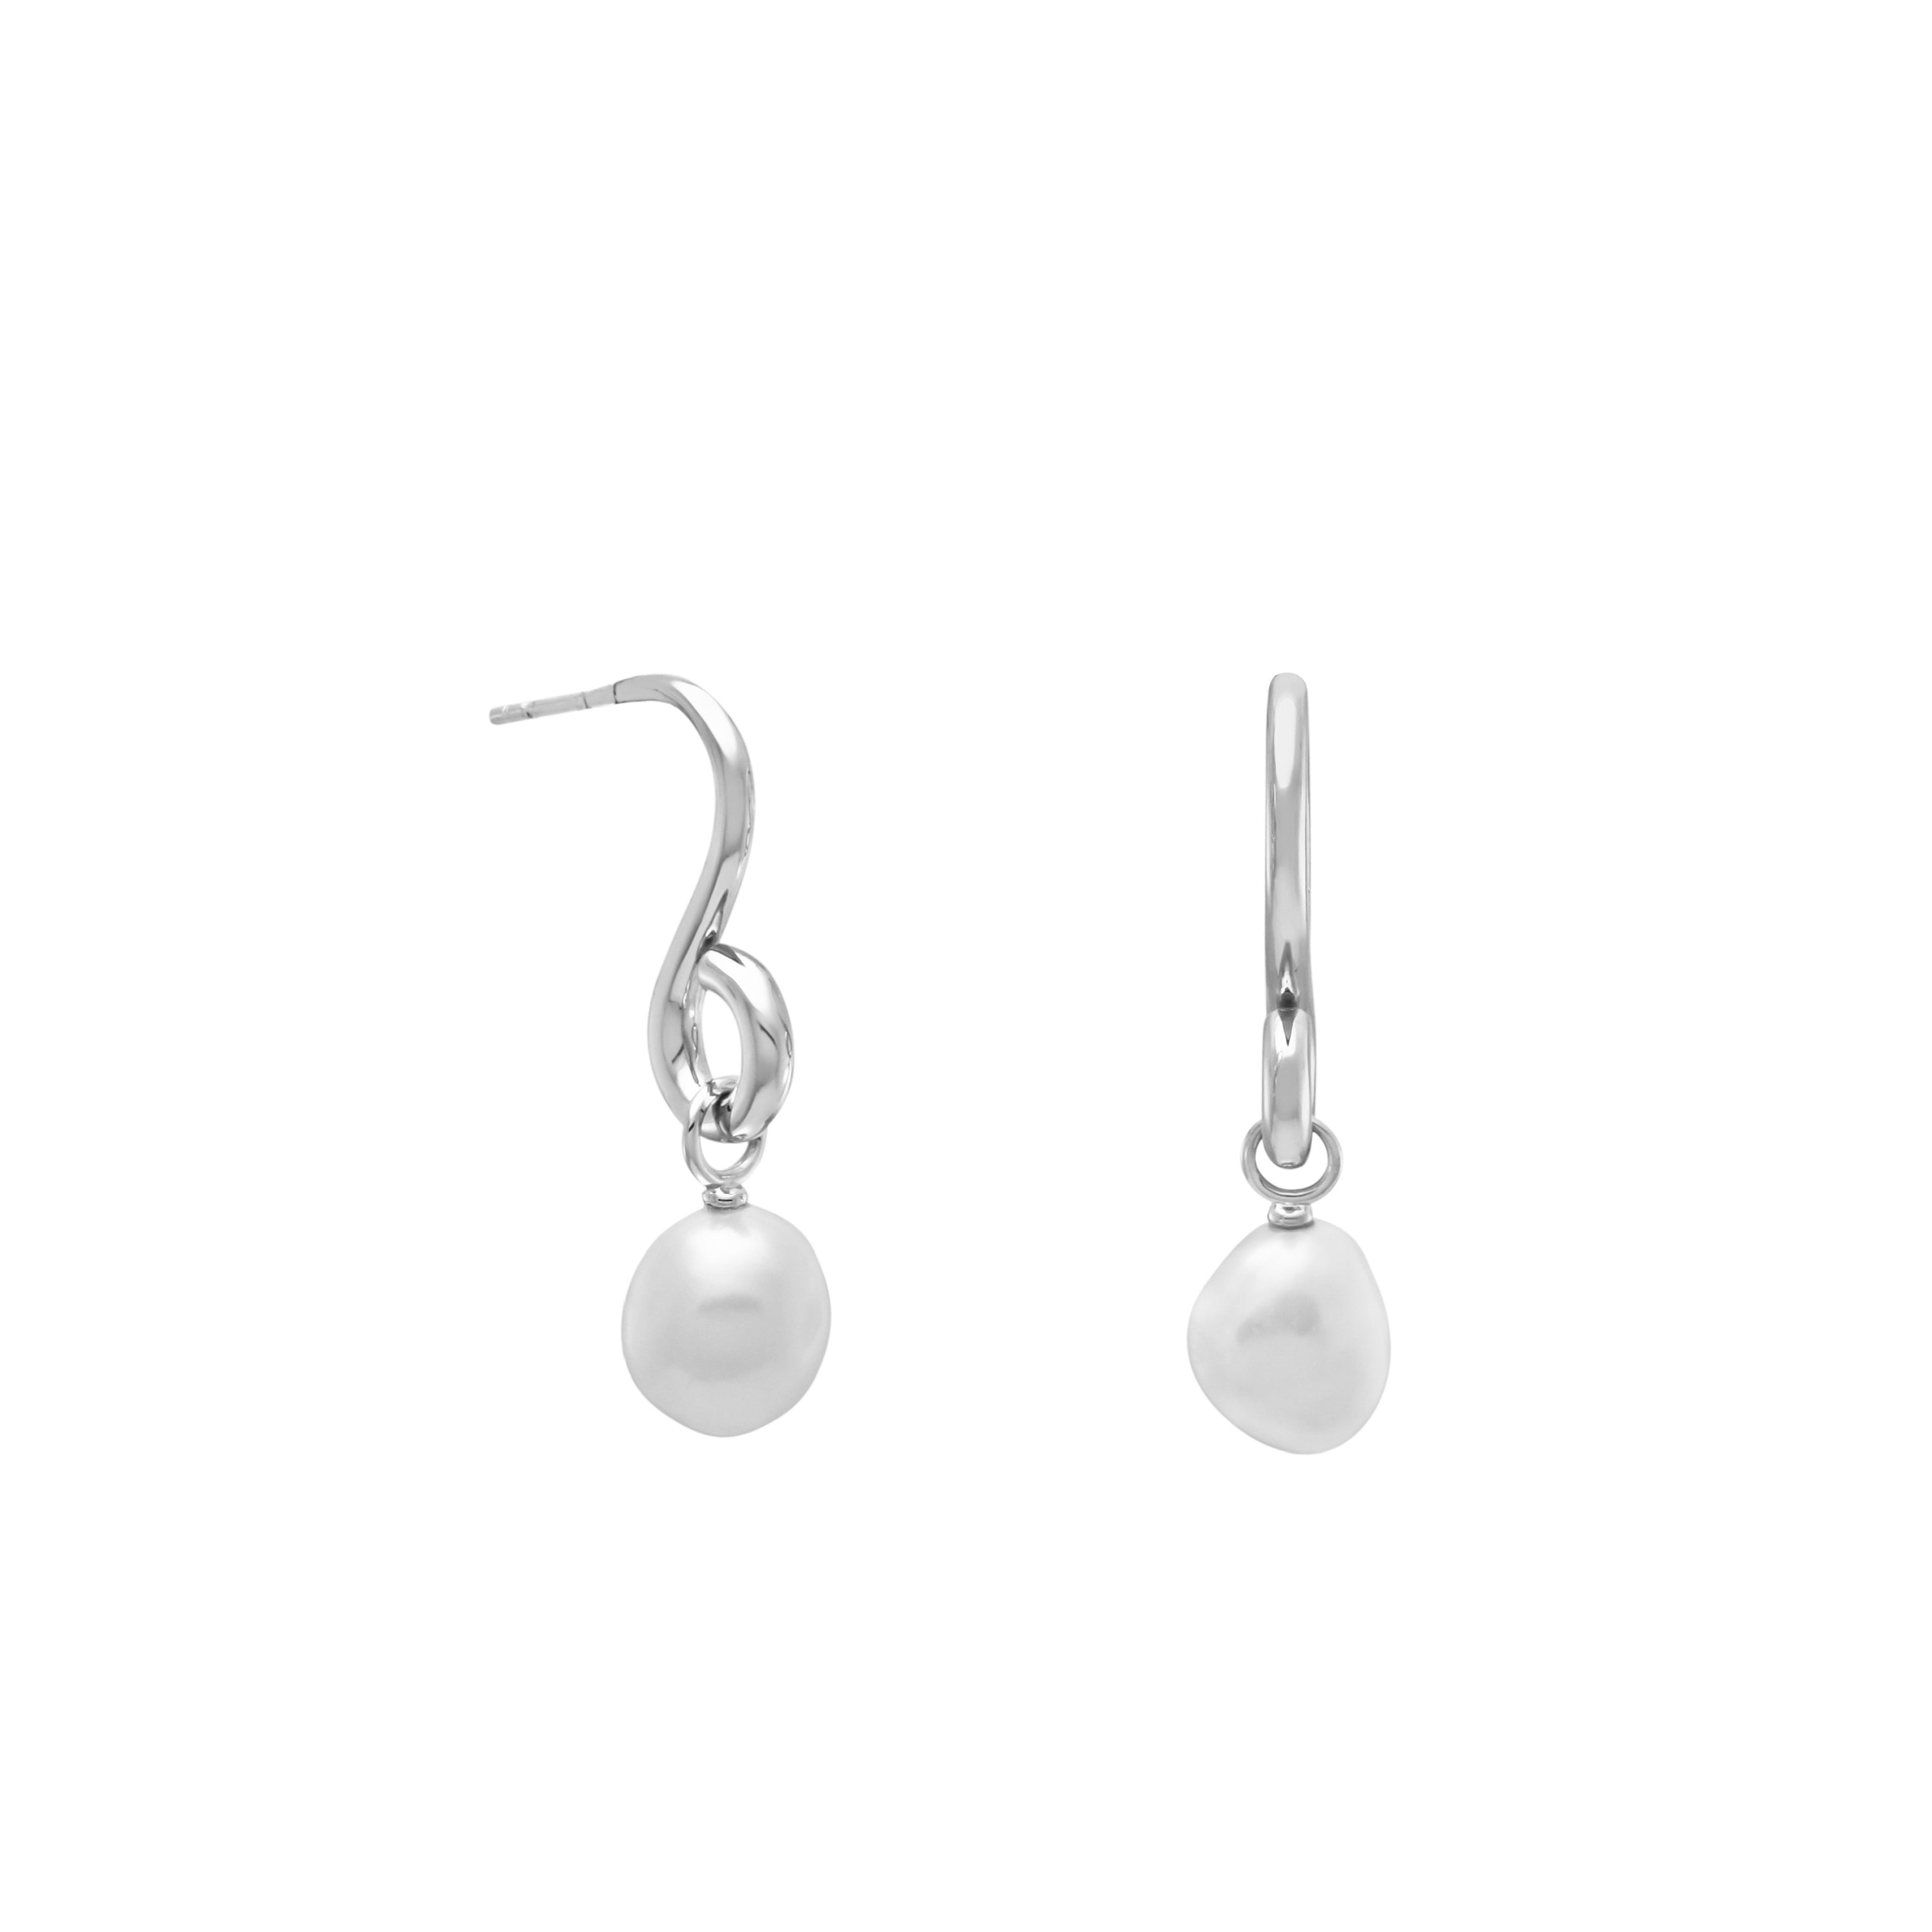 Oura Pearl Stud Earring. Silver